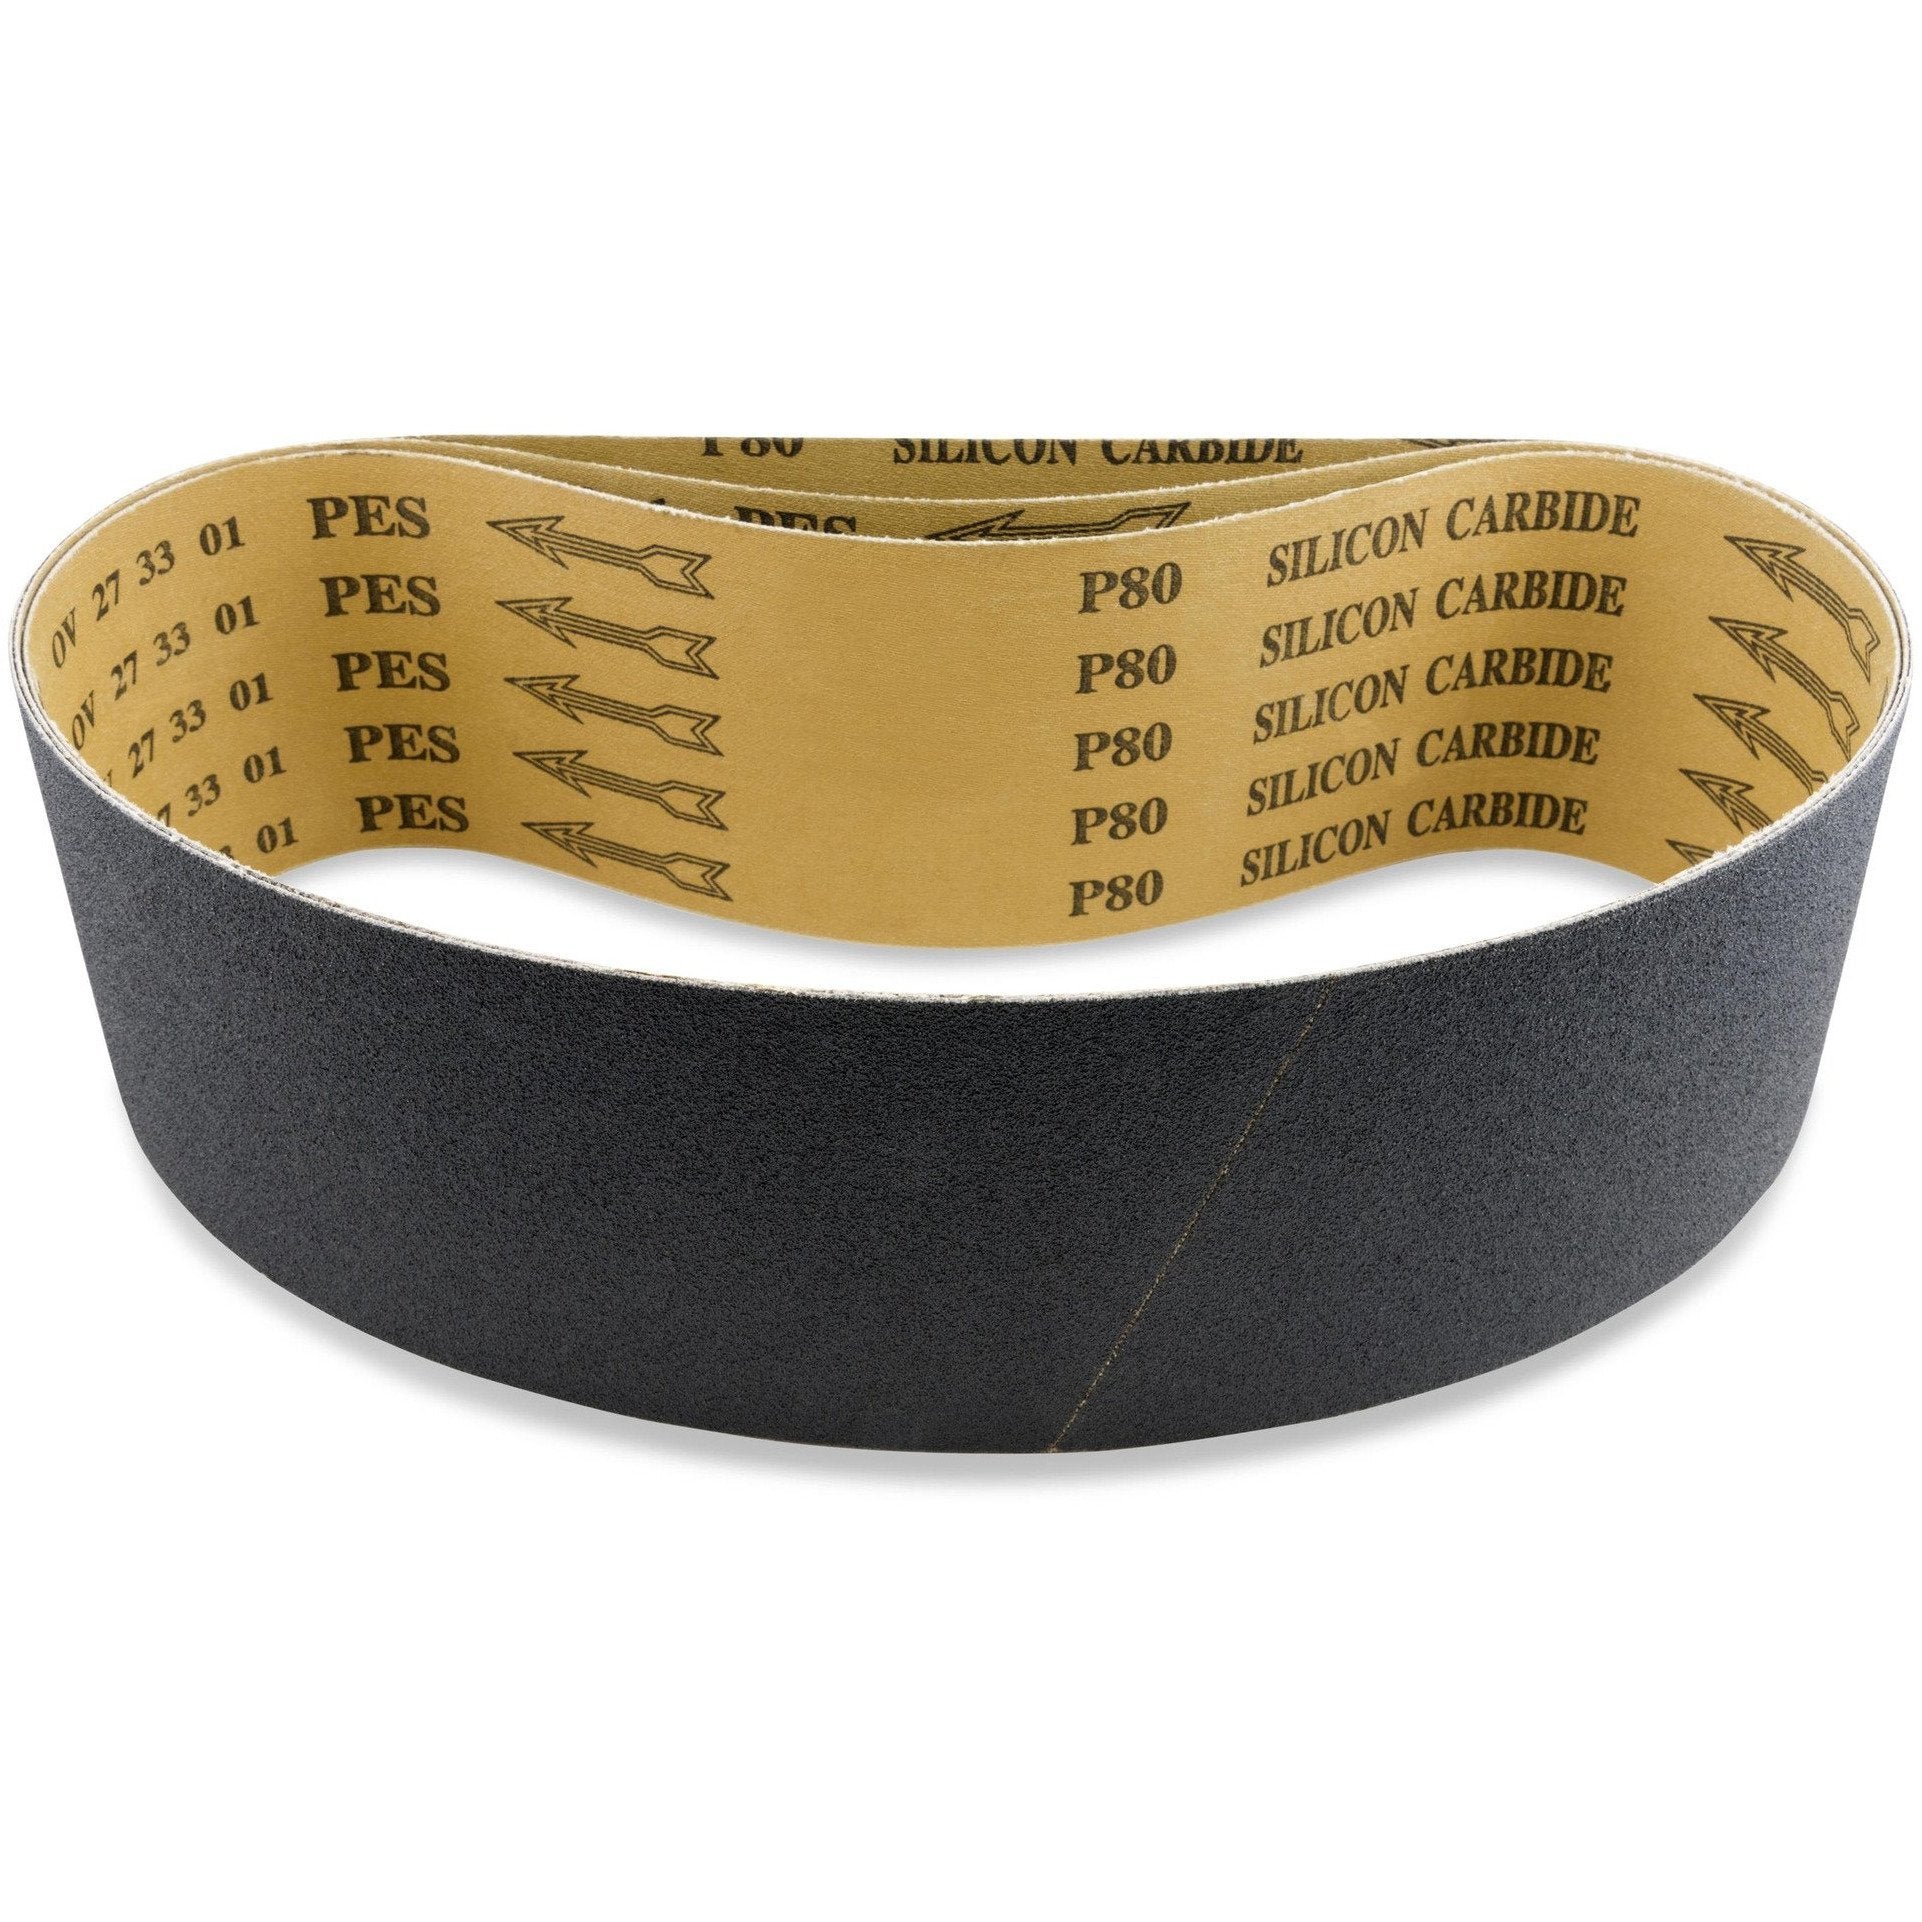 2 X 30 1/2 Inch Industrial Grade Silicon Carbide Sanding Belts, 6 Pack - Red Label Abrasives